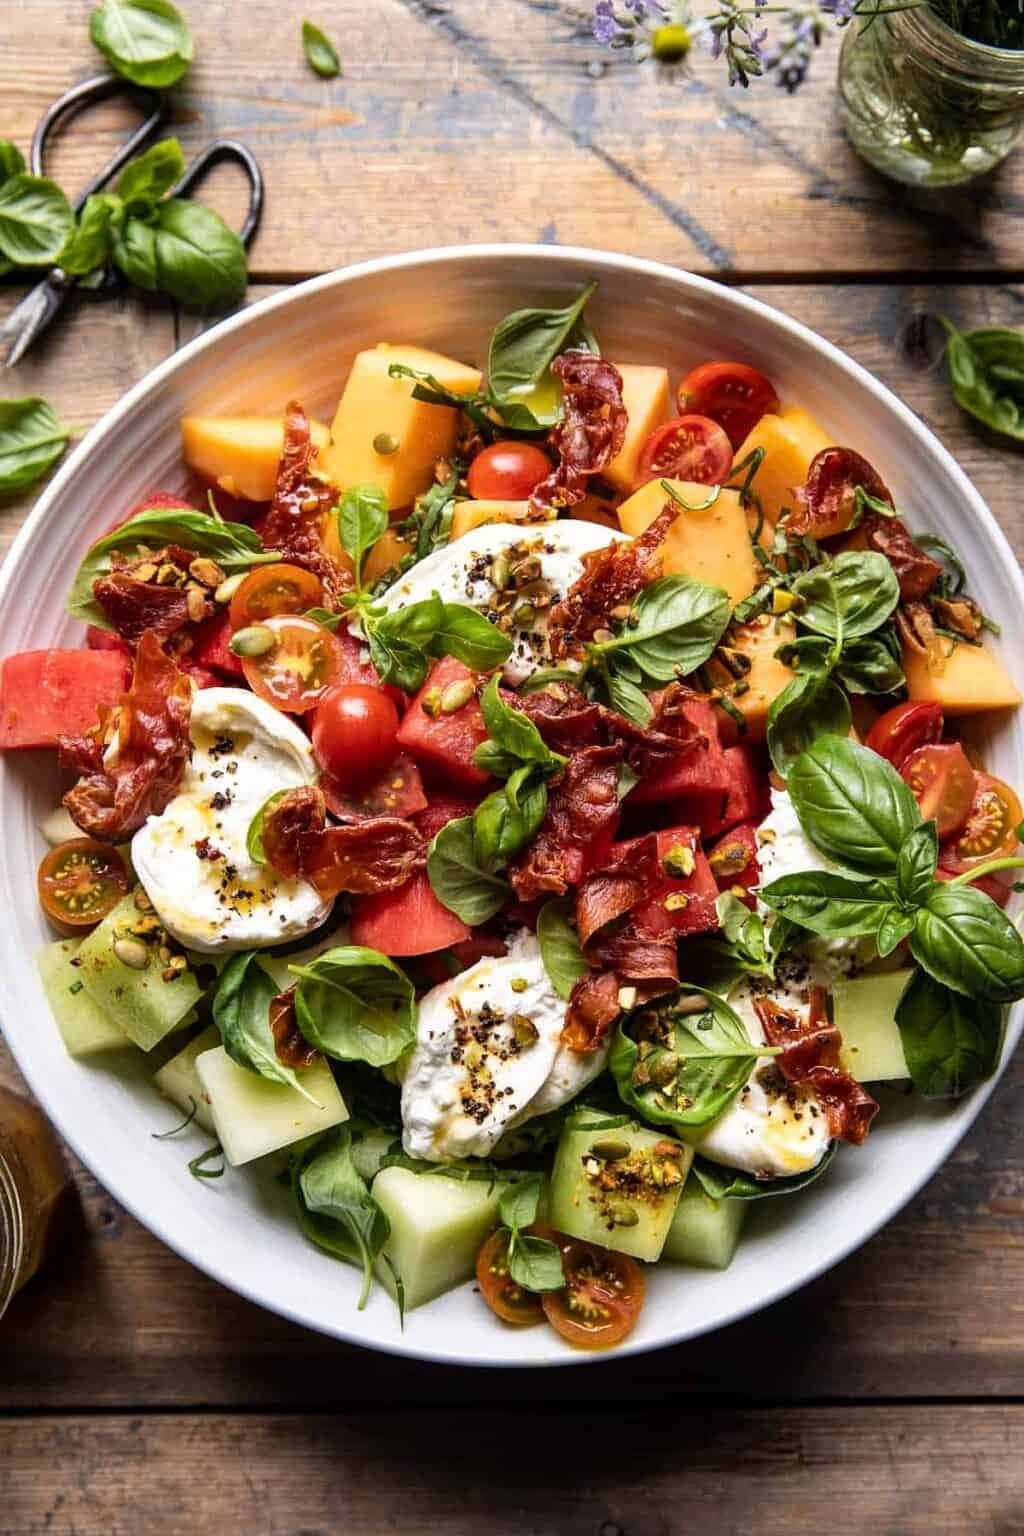 Melon Basil Burrata Salad with melon, fresh basil, cheese, prosciutto, tomatoes, and salted nuts